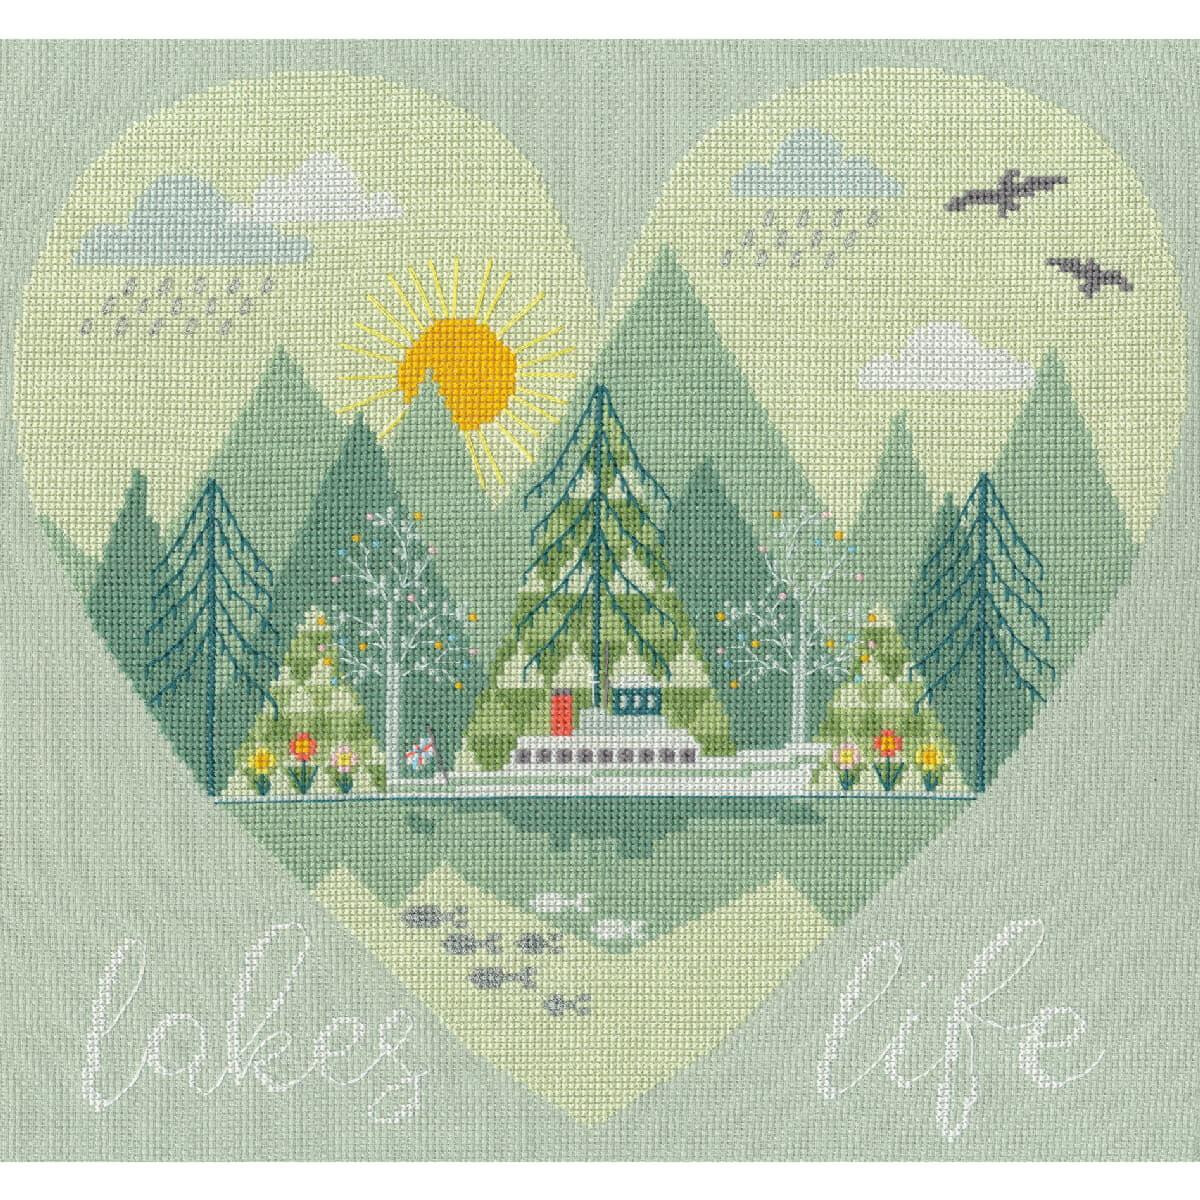 Bothy Threads counted cross stitch kit "Lakes...